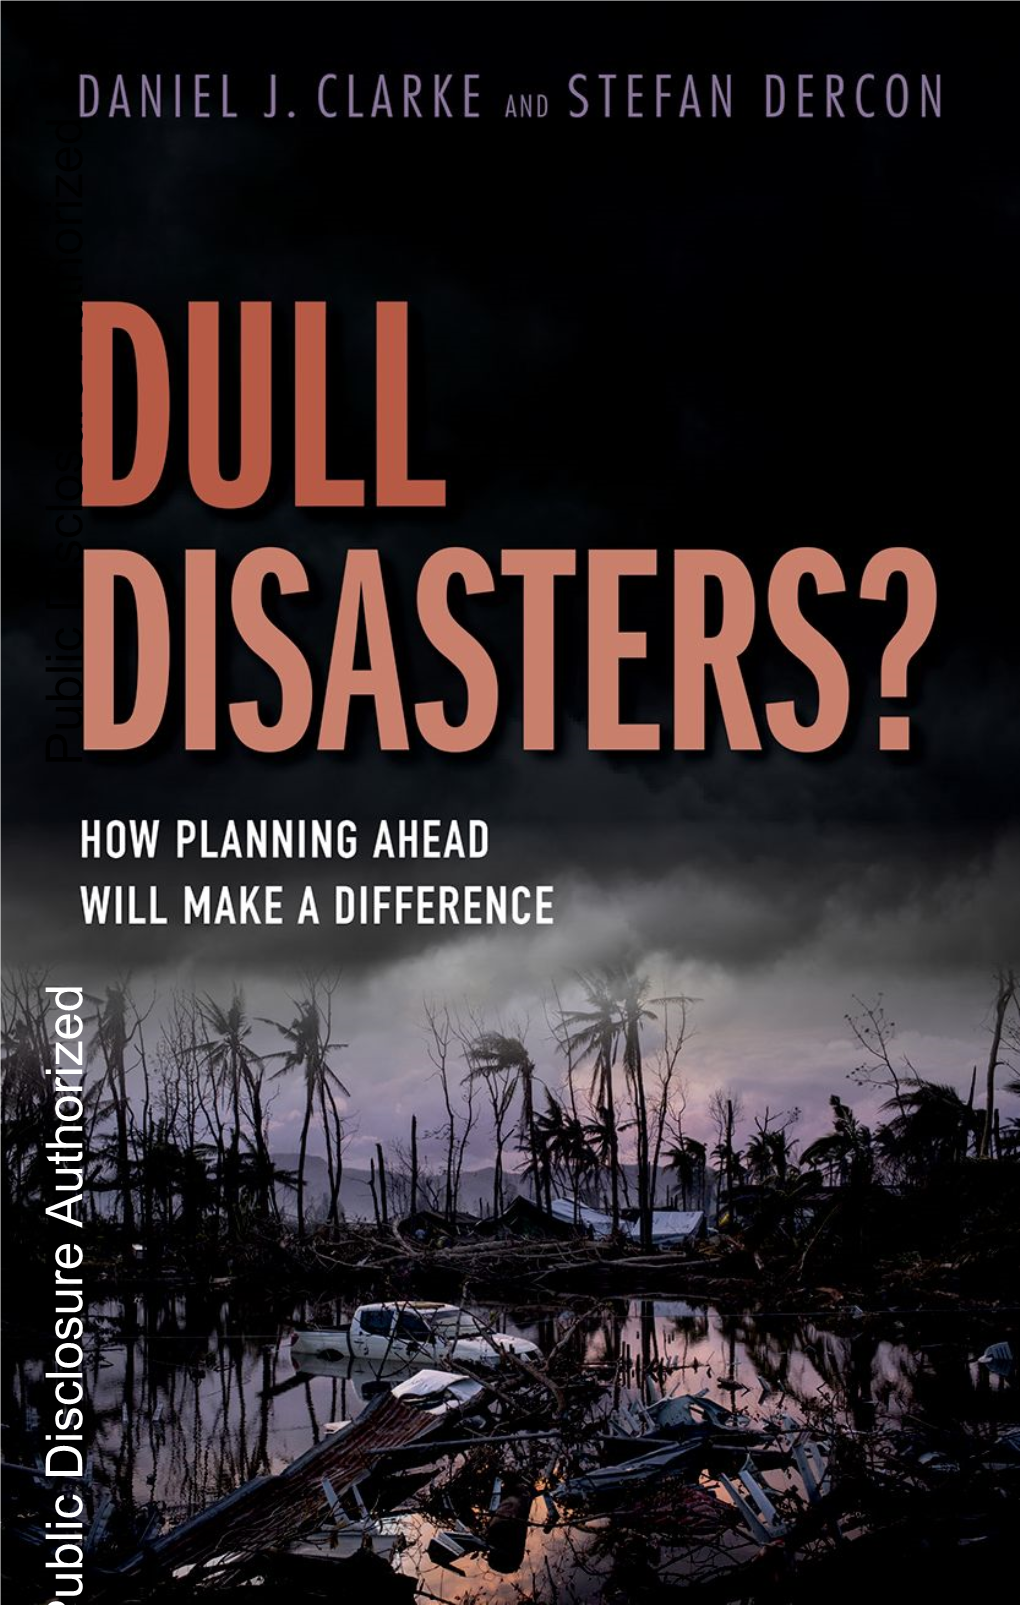 Dull Disasters? How Planning